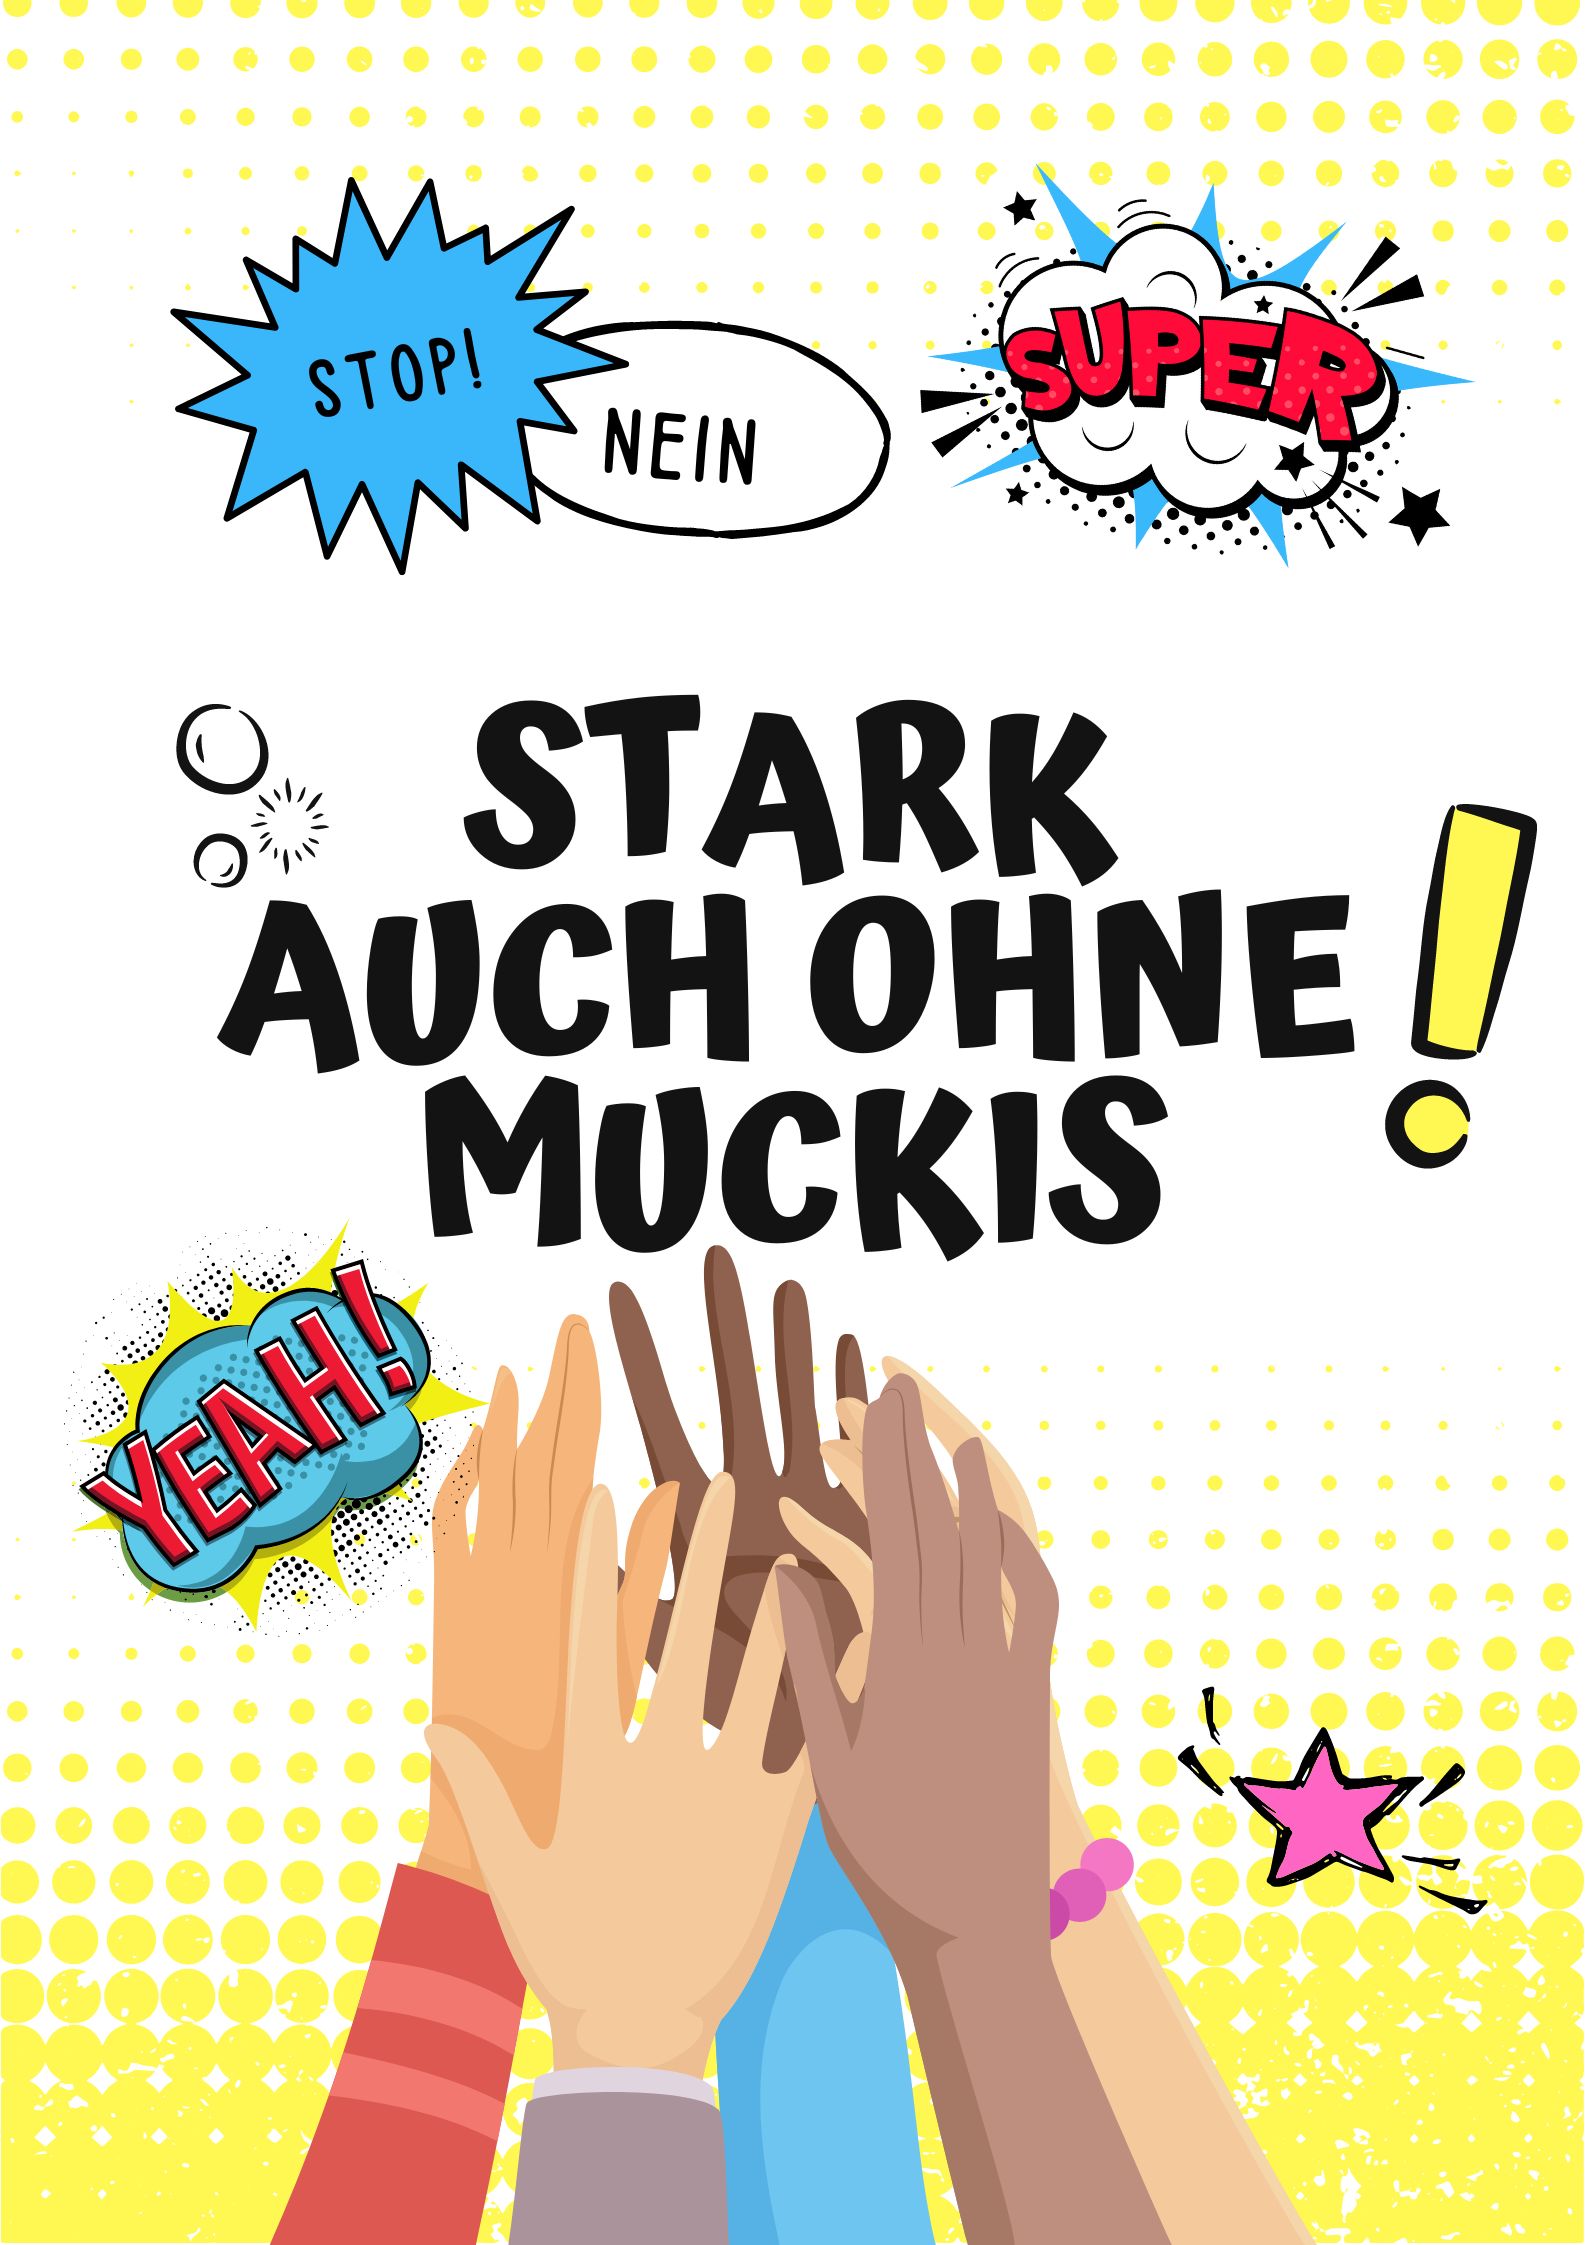 You are currently viewing Jhg. 5: Stark auch ohne Muckis